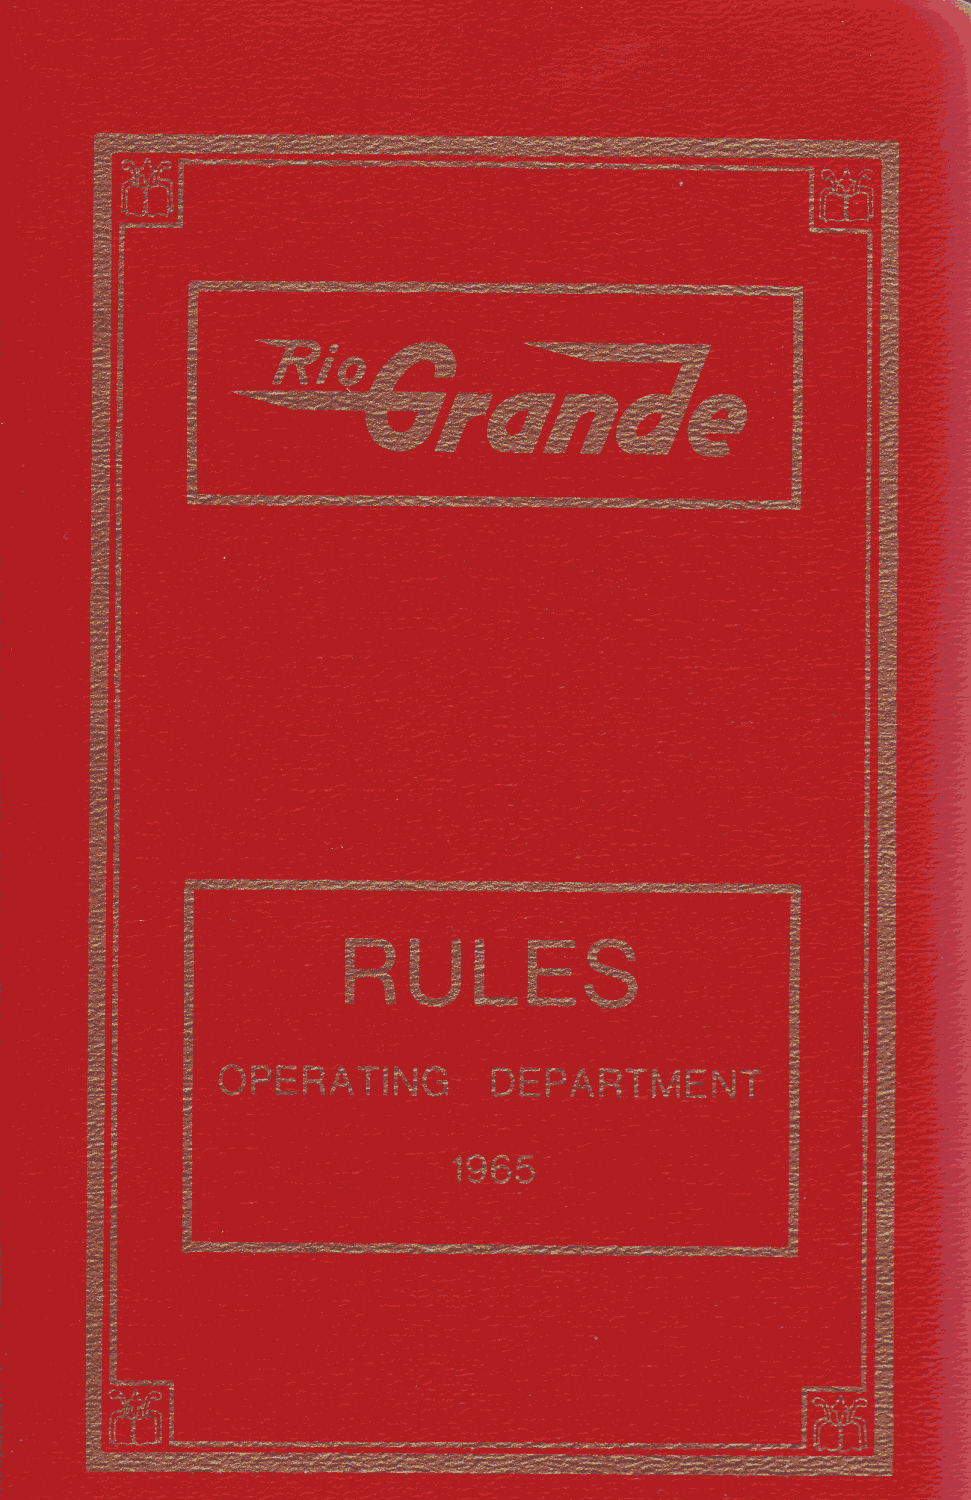 drgw_rules_1965_p148.png